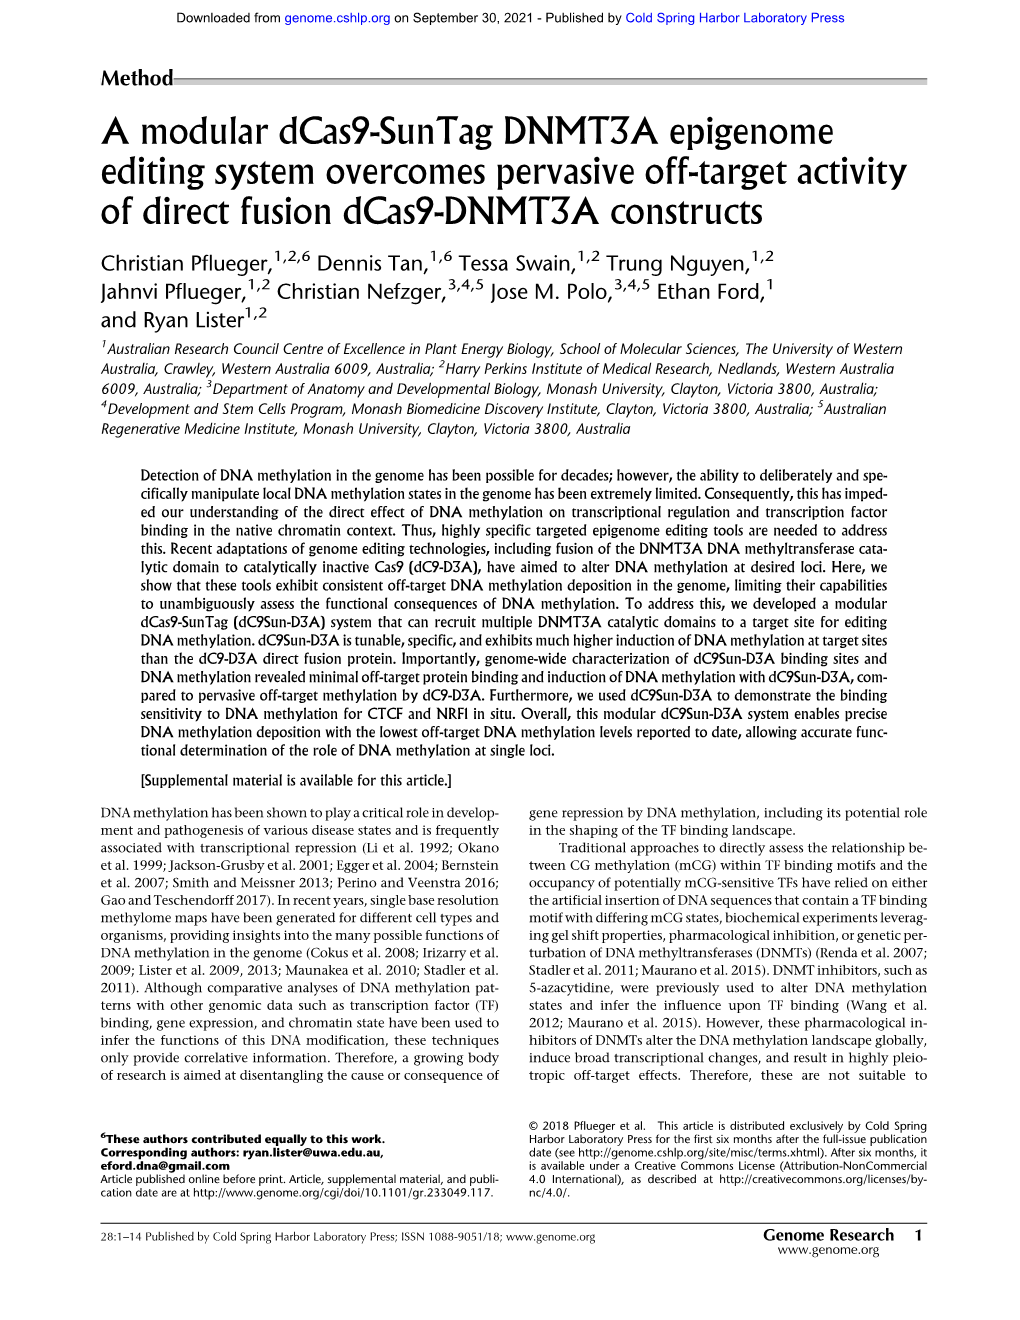 A Modular Dcas9-Suntag DNMT3A Epigenome Editing System Overcomes Pervasive Off-Target Activity of Direct Fusion Dcas9-DNMT3A Constructs